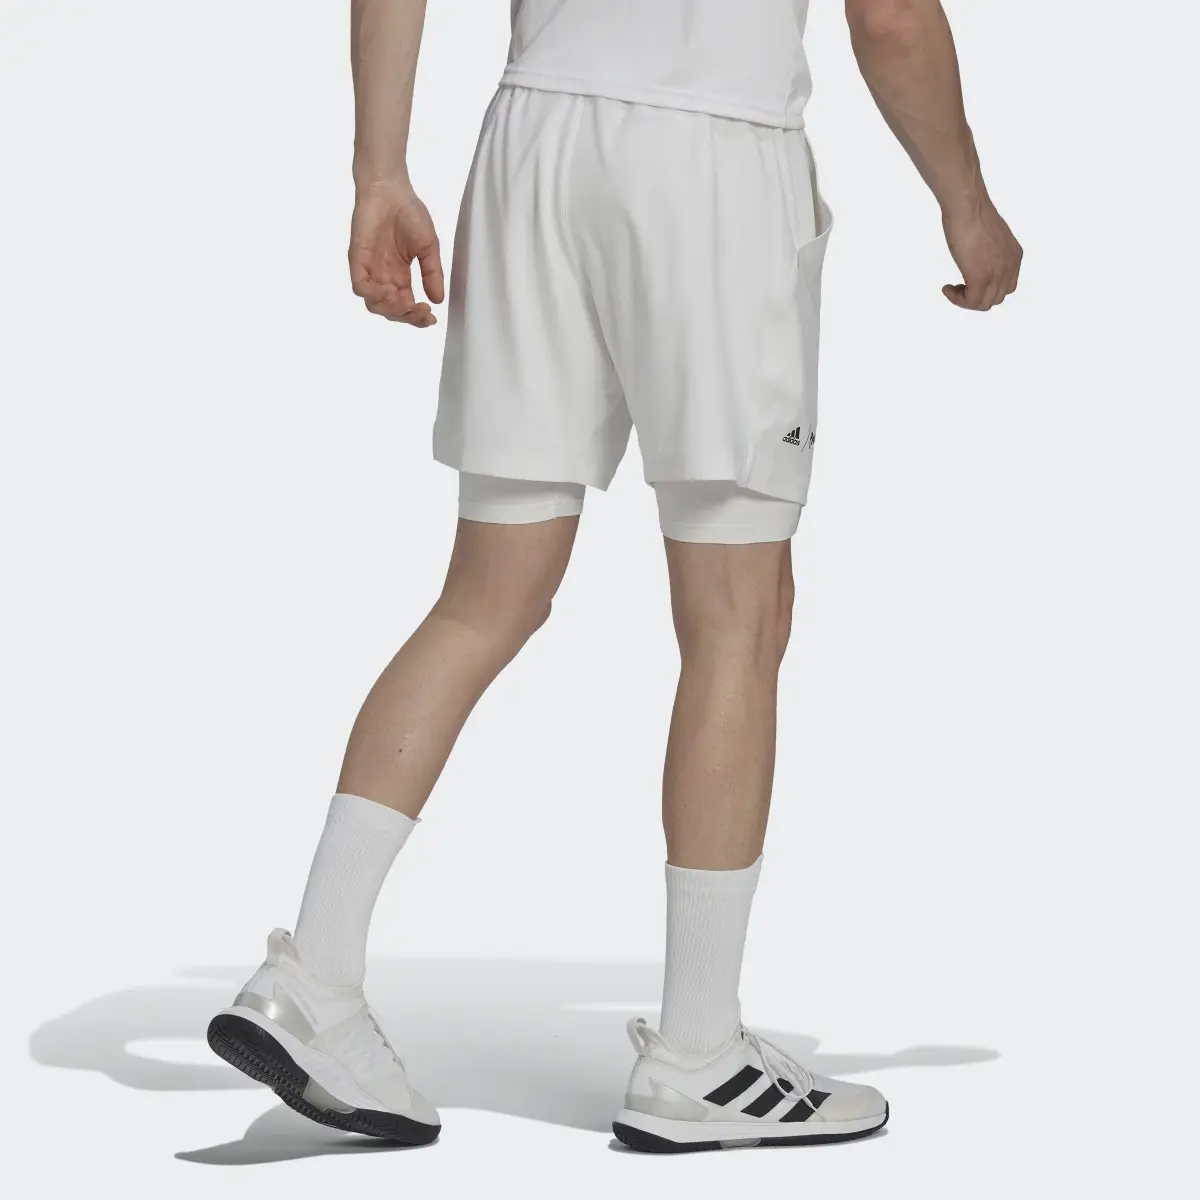 Adidas Short London Two-in-One. 2